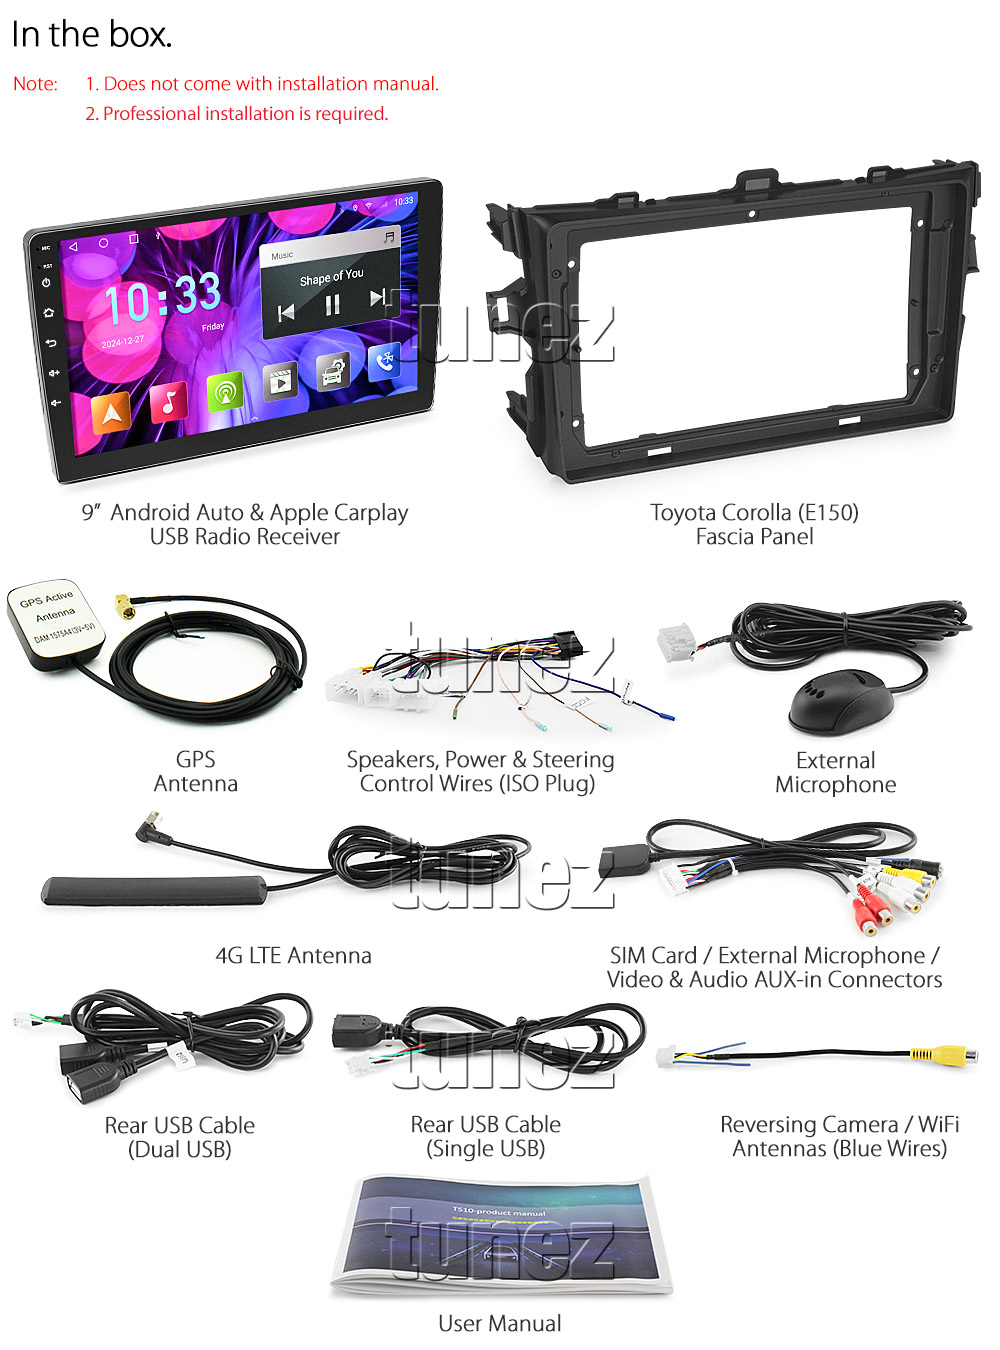 TCL07AND GPS Aftermarket Toyota Corolla E150 2007 2008 2009 2010 2011 2012 touchscreen capacitive 9 inches touchscreen Universal Double DIN Latest Australia UK European USA Original CarPlay Android Auto 10 Car USB player radio stereo 4GdLTE WiFi head unit details Aftermarket External and Internal Microphone Bluetooth Europe Sat Nav Navi Plug and Play ISO Plug Wiring Harness Matching Fascia Kit Facia Free Reversing Camera Album Art ID3 Tag RMVB MP3 MP4 AVI MKV Full High Definition FHD 1080p DAB+ Digital Radio DAB + Connects2 CTSIZ001.2